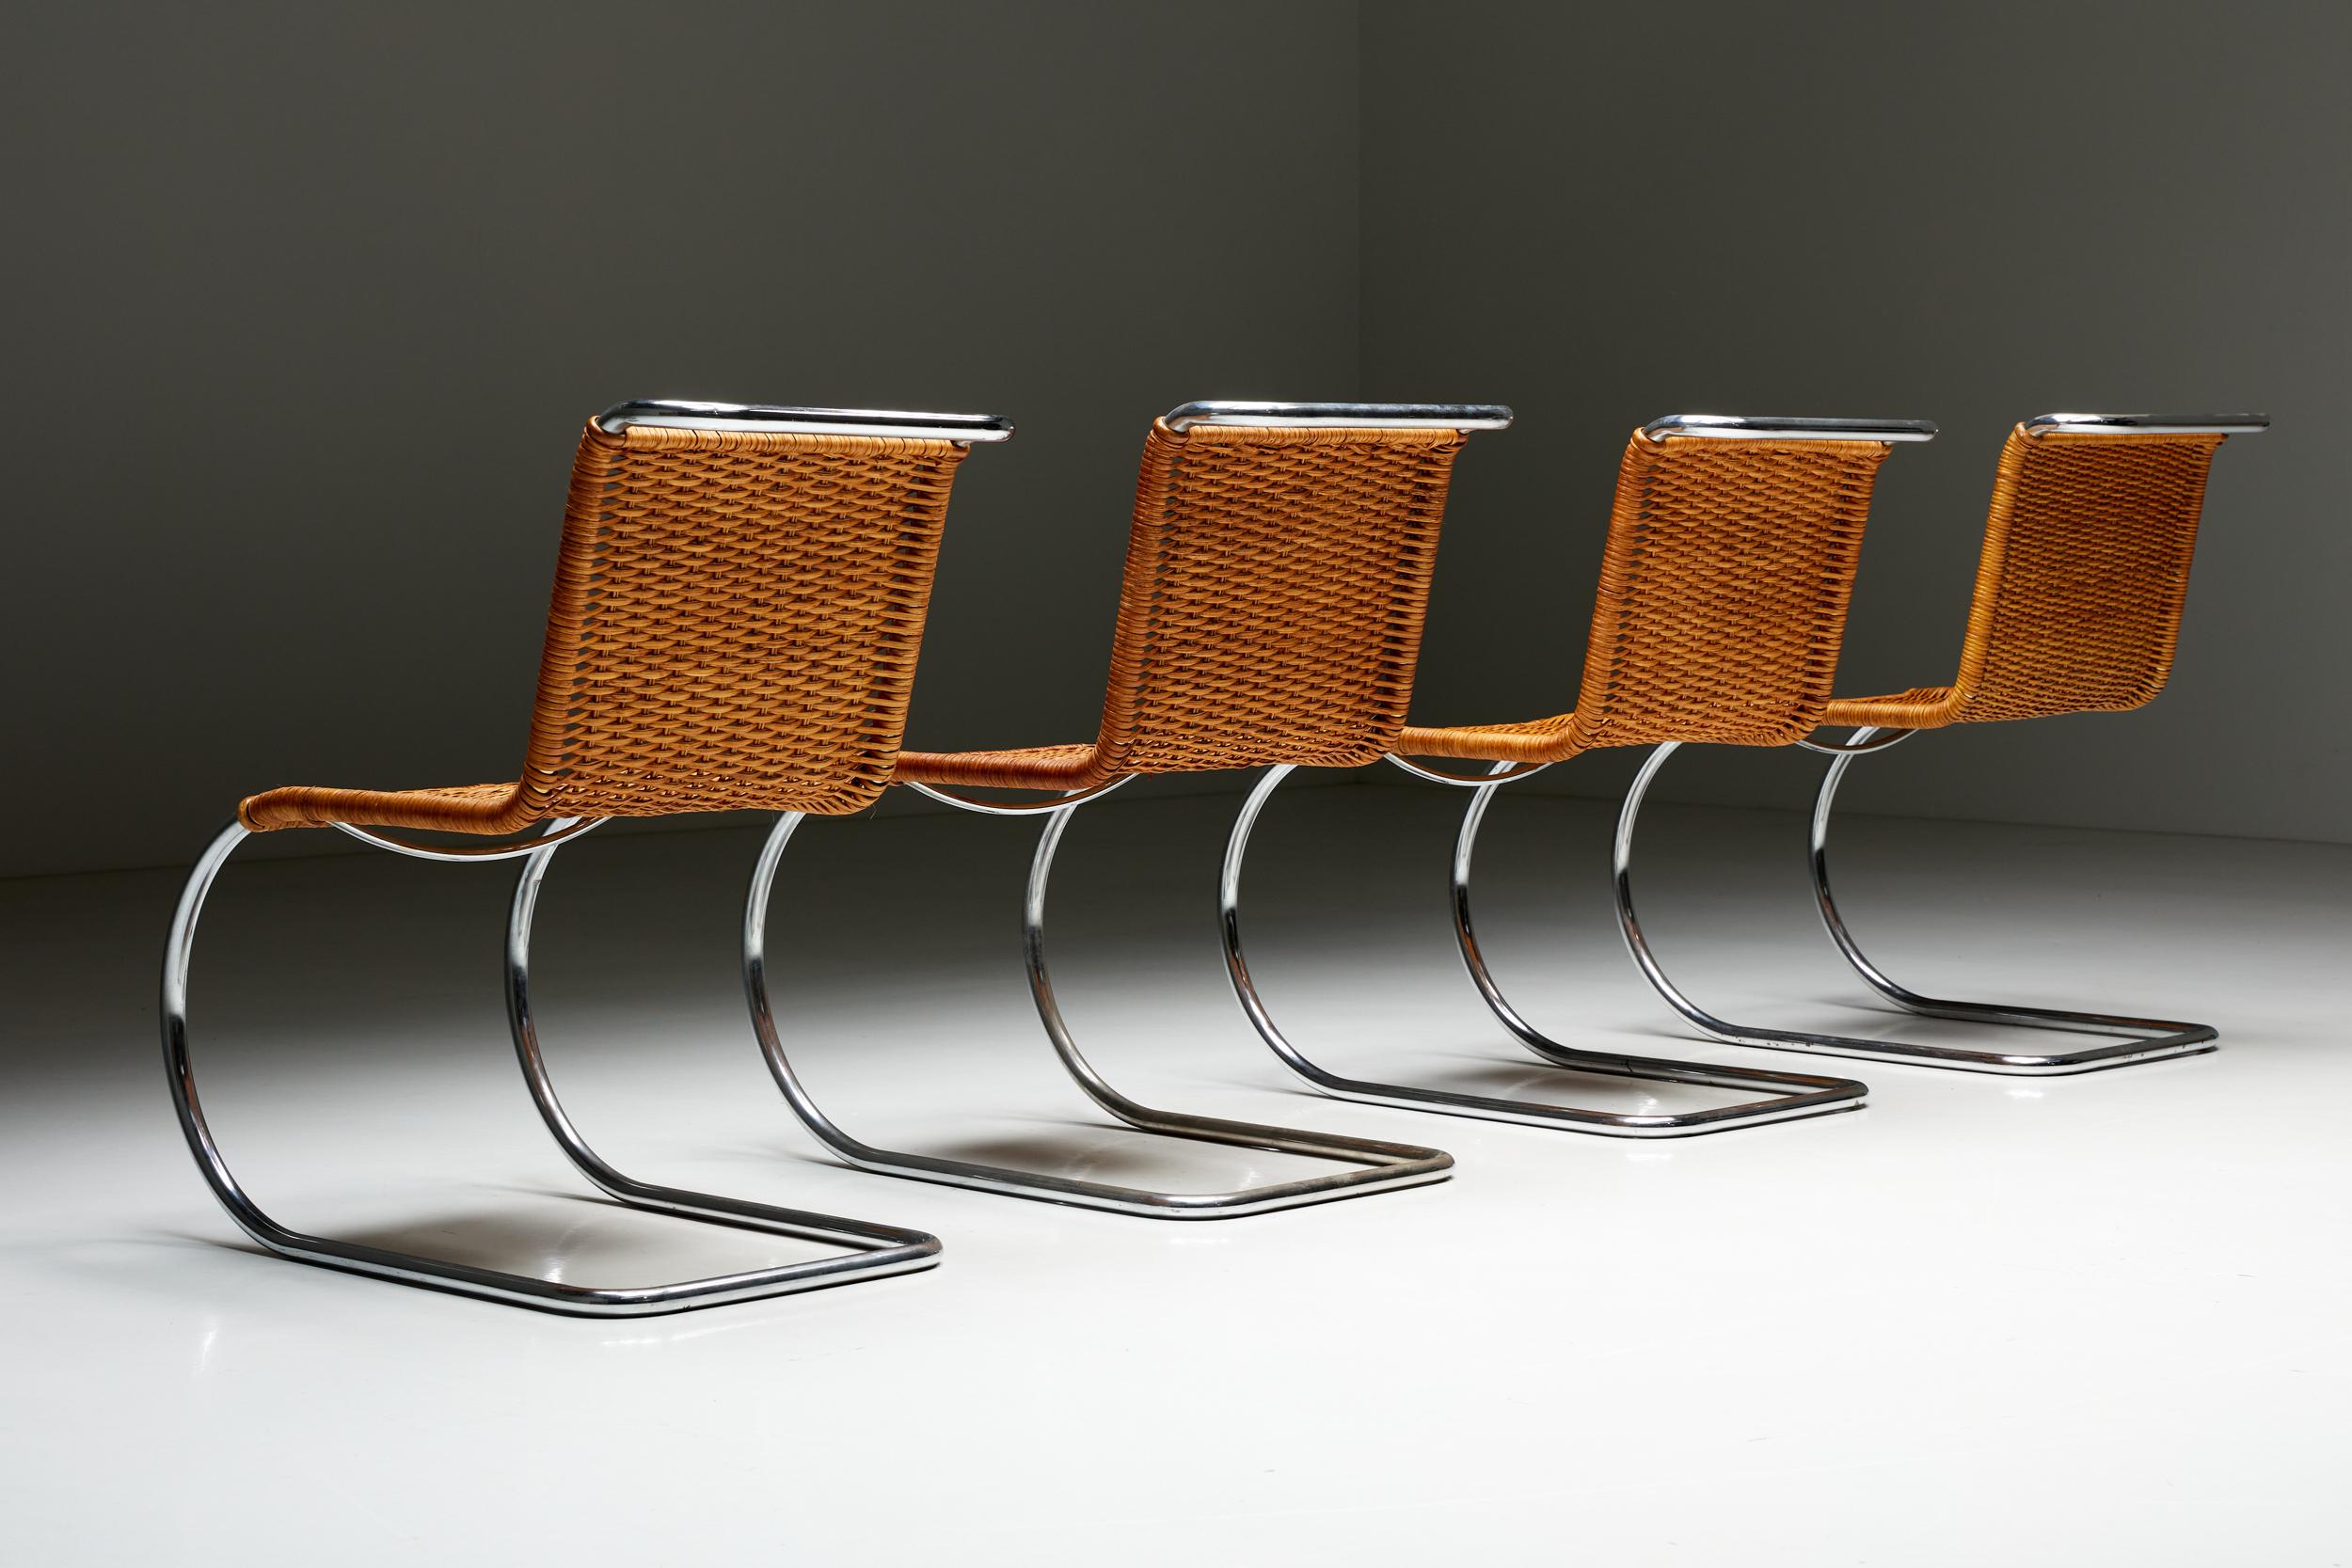 Bauhaus; Mies van der Rohe; Tecta; M210; Modernist; Mid-Century Modern; Marcel Breuer; 1980s; Germany; Steel Frame; Rattan; B42; Weißenhof;

MR10 chairs designed in 1926 by renowned architect Ludwig Mies van der Rohe in Germany and produced by Tecta